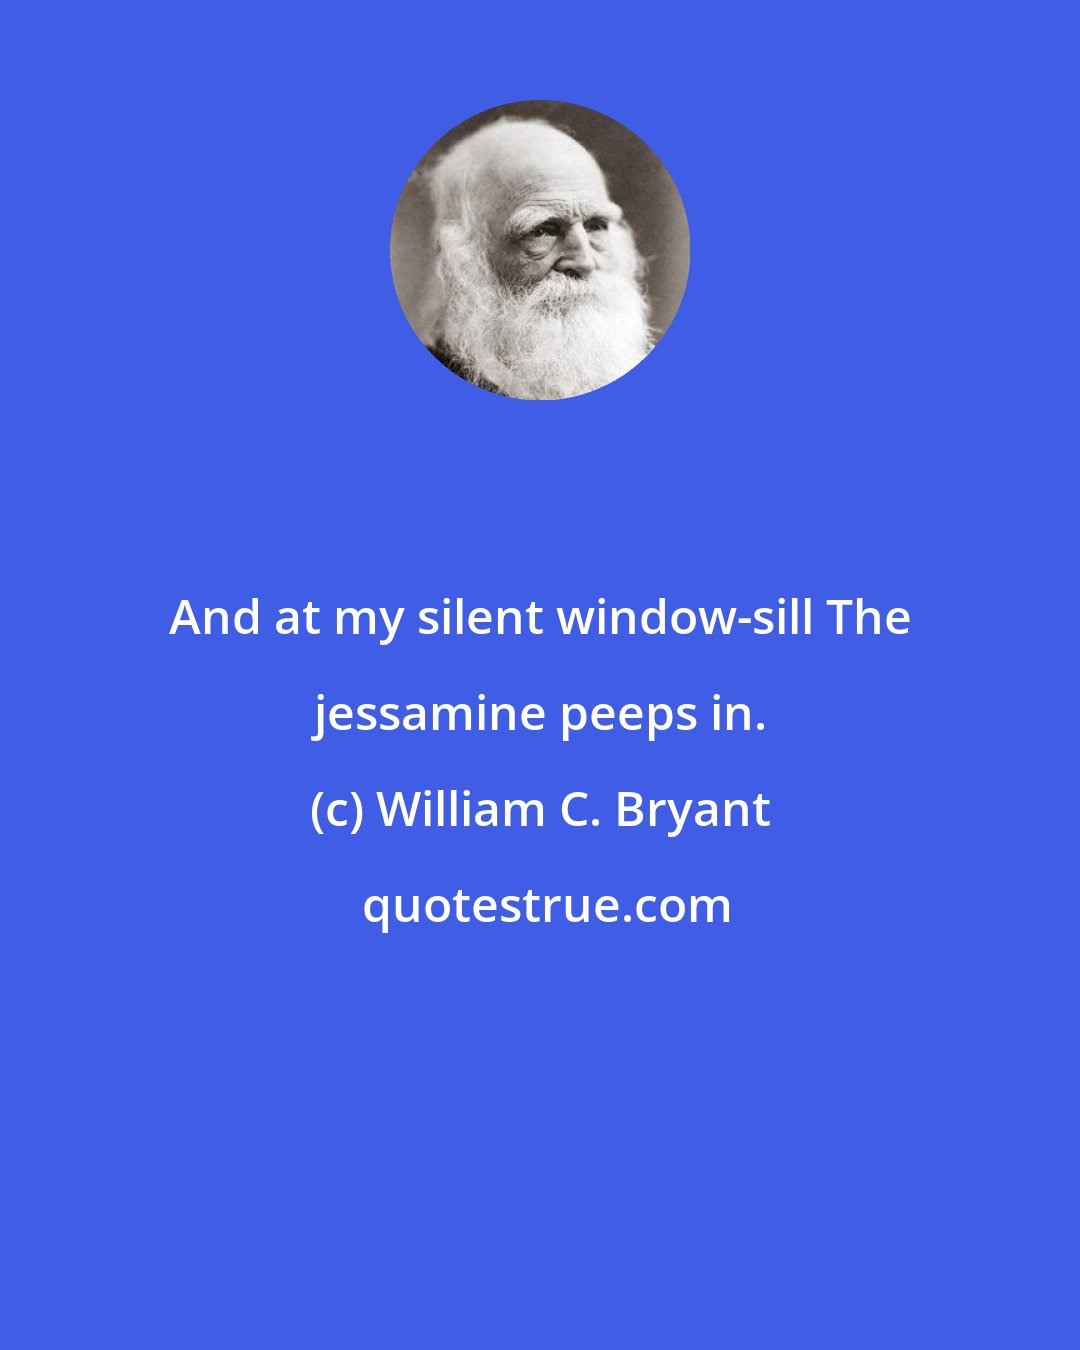 William C. Bryant: And at my silent window-sill The jessamine peeps in.